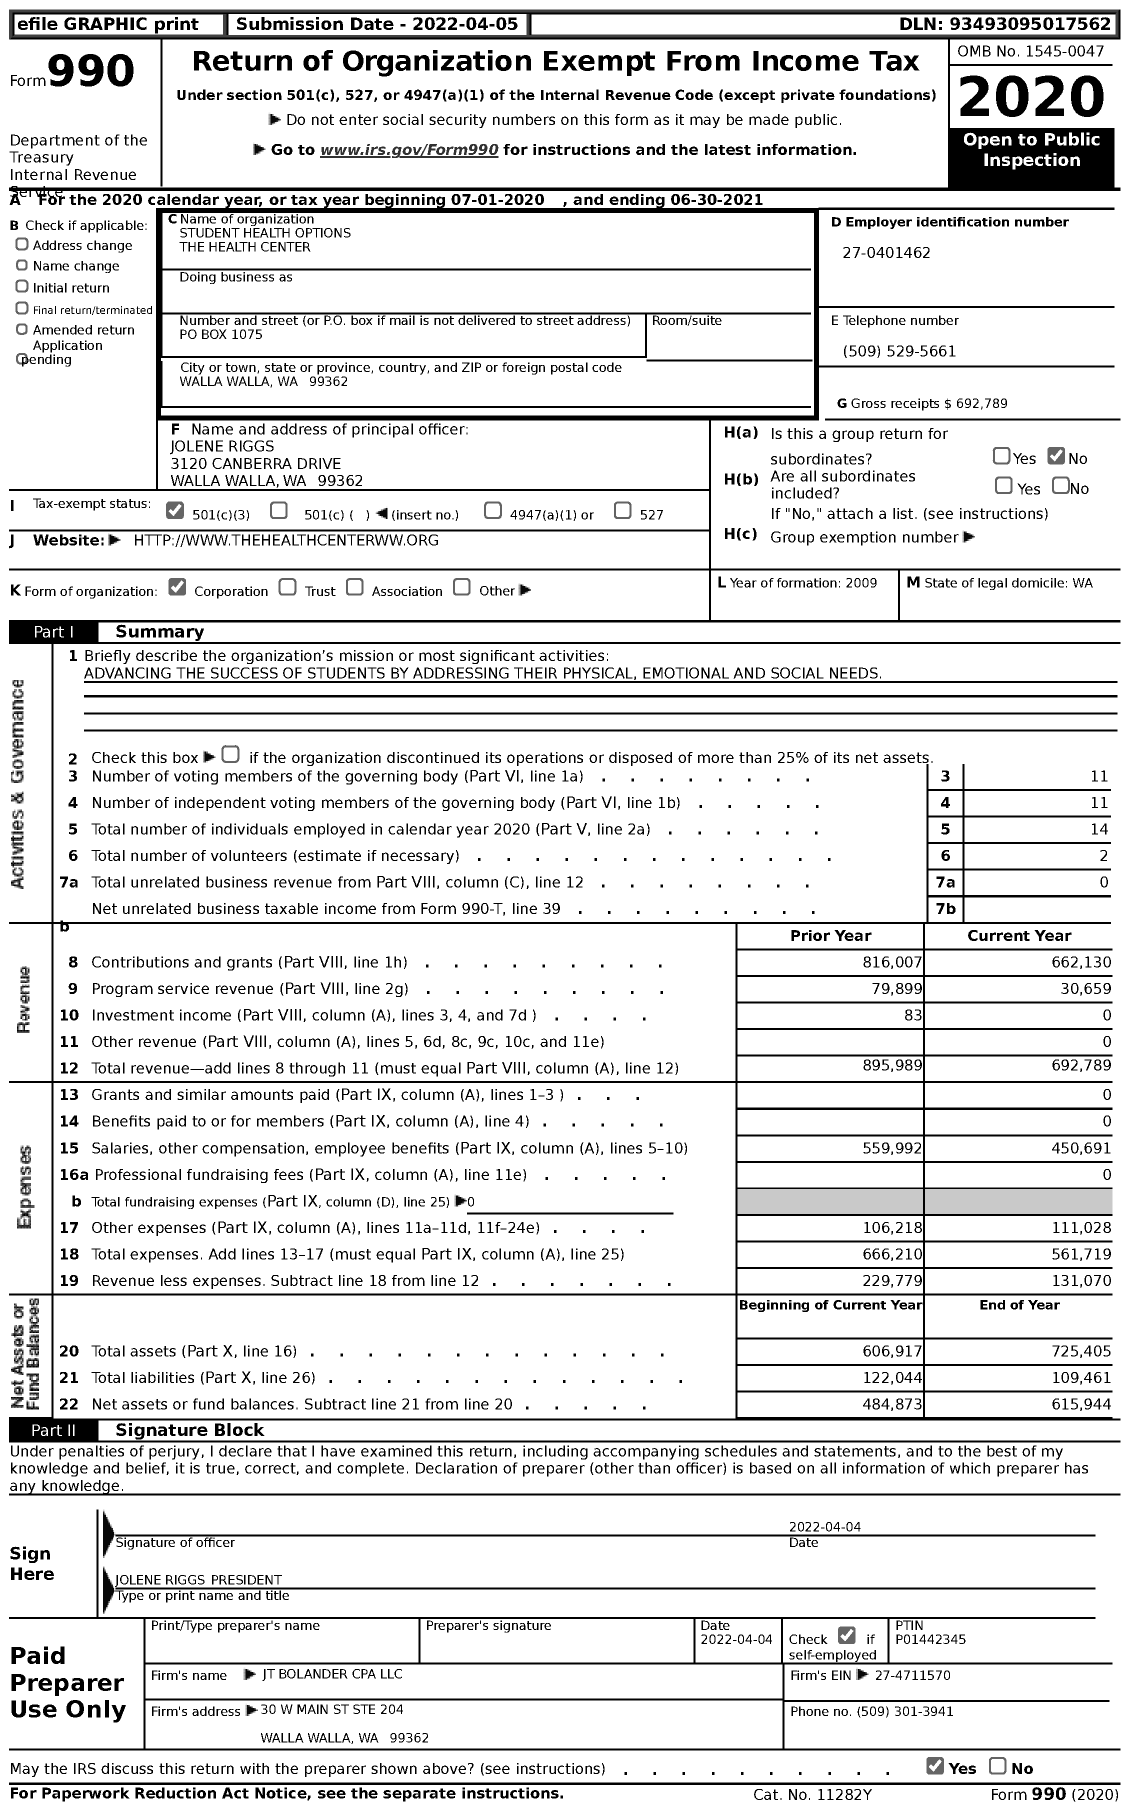 Image of first page of 2020 Form 990 for Student Health Options the Health Center